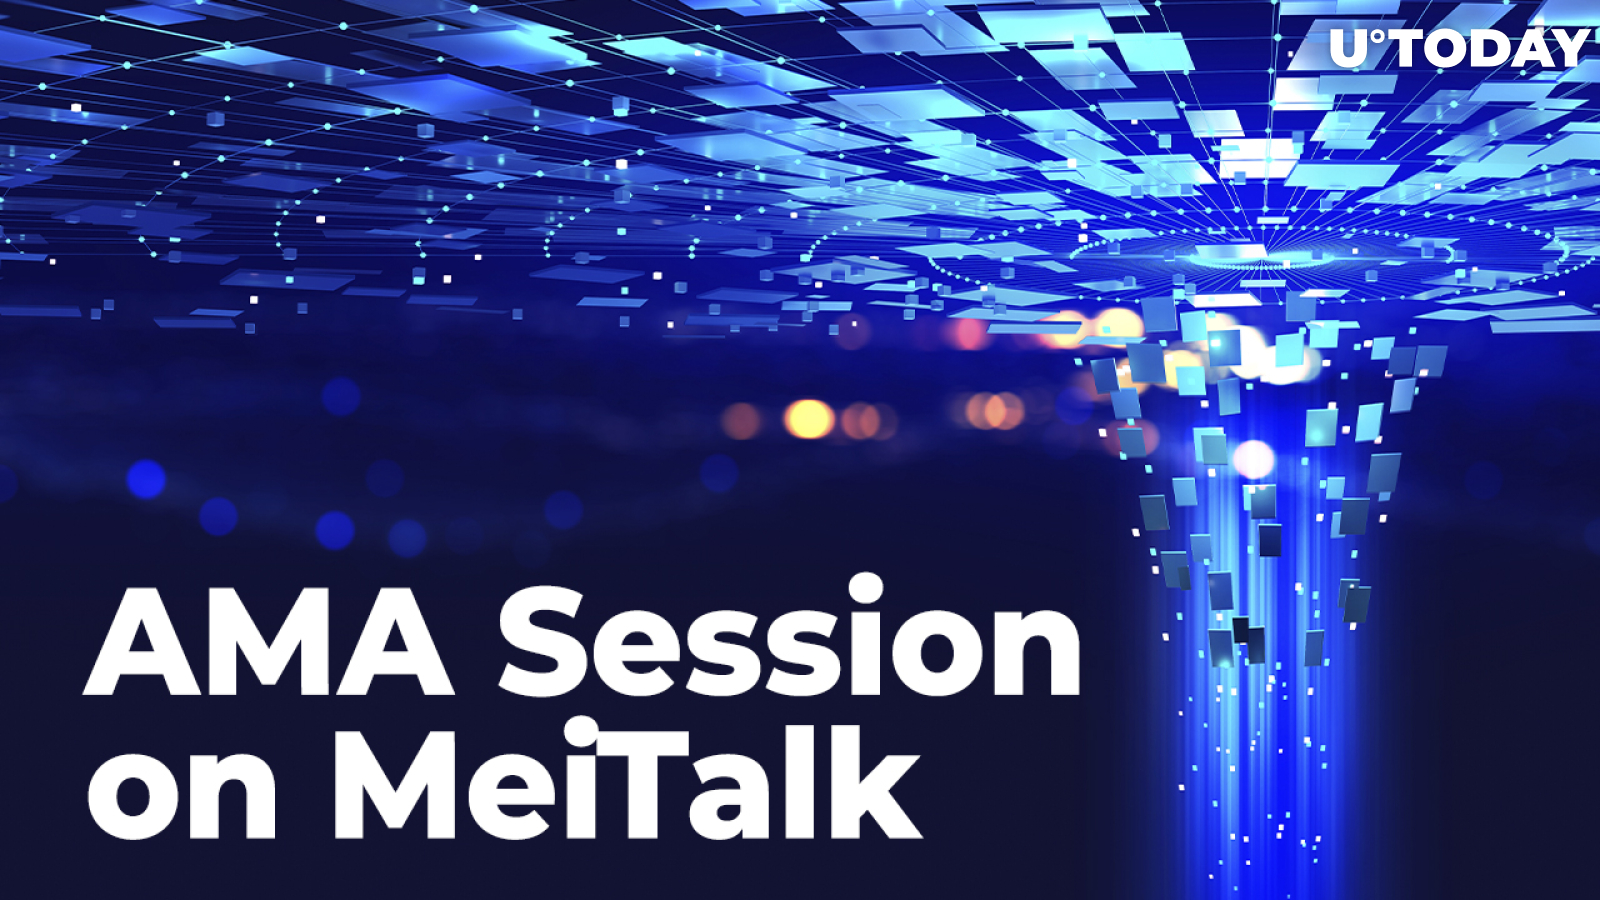 StreamCoin CEO Multicasts AMA Session on MeiTalk